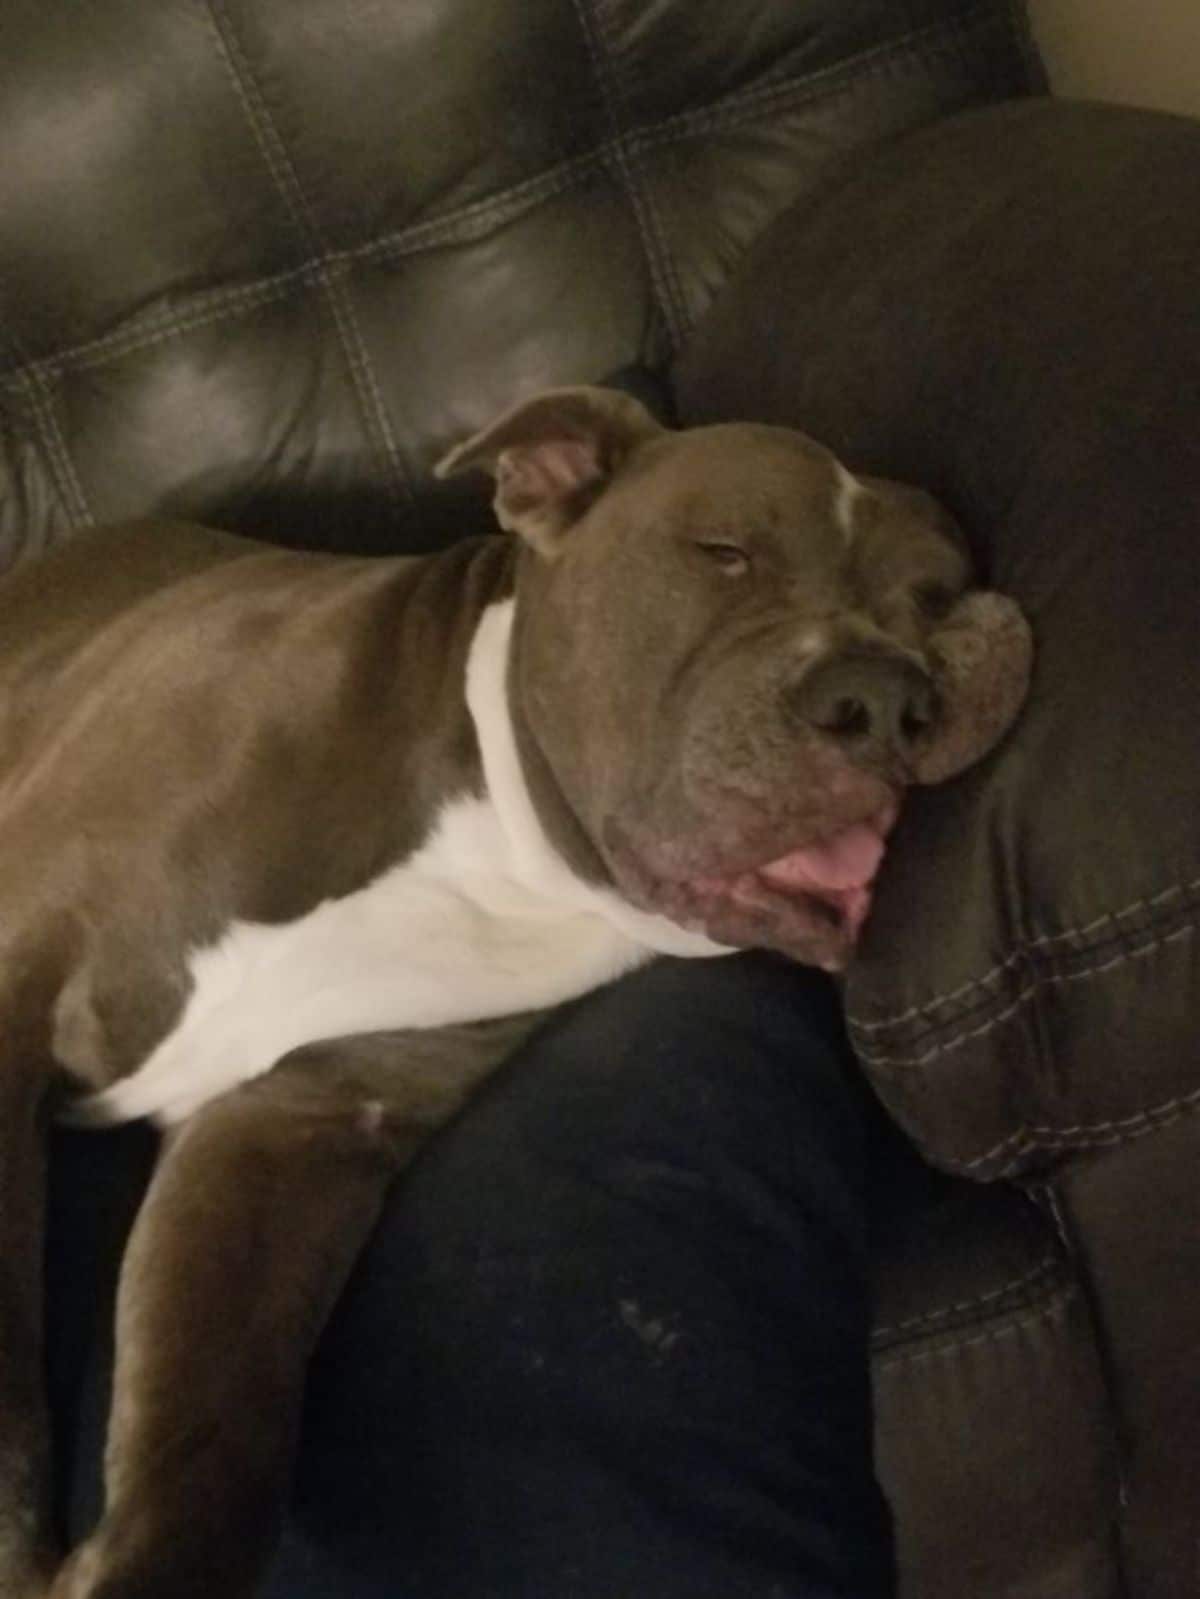 brown and white pitbull sleeping sideways on a brown sofa with the tongue sticking out slightly